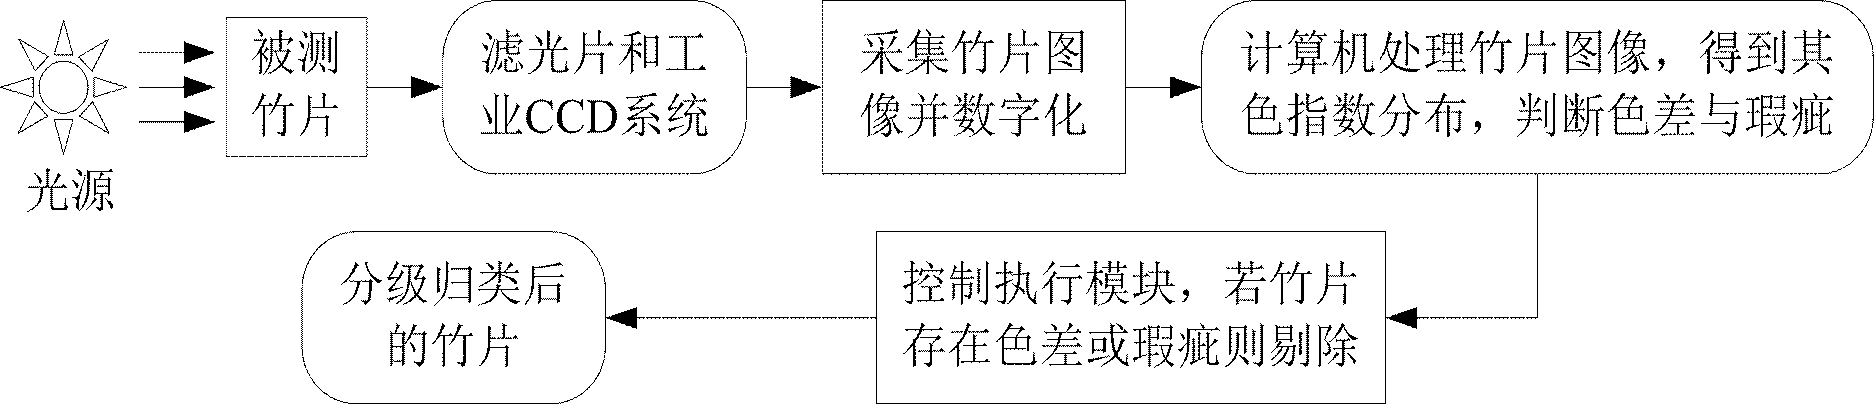 Automatic identifying and grading method for bamboo chips